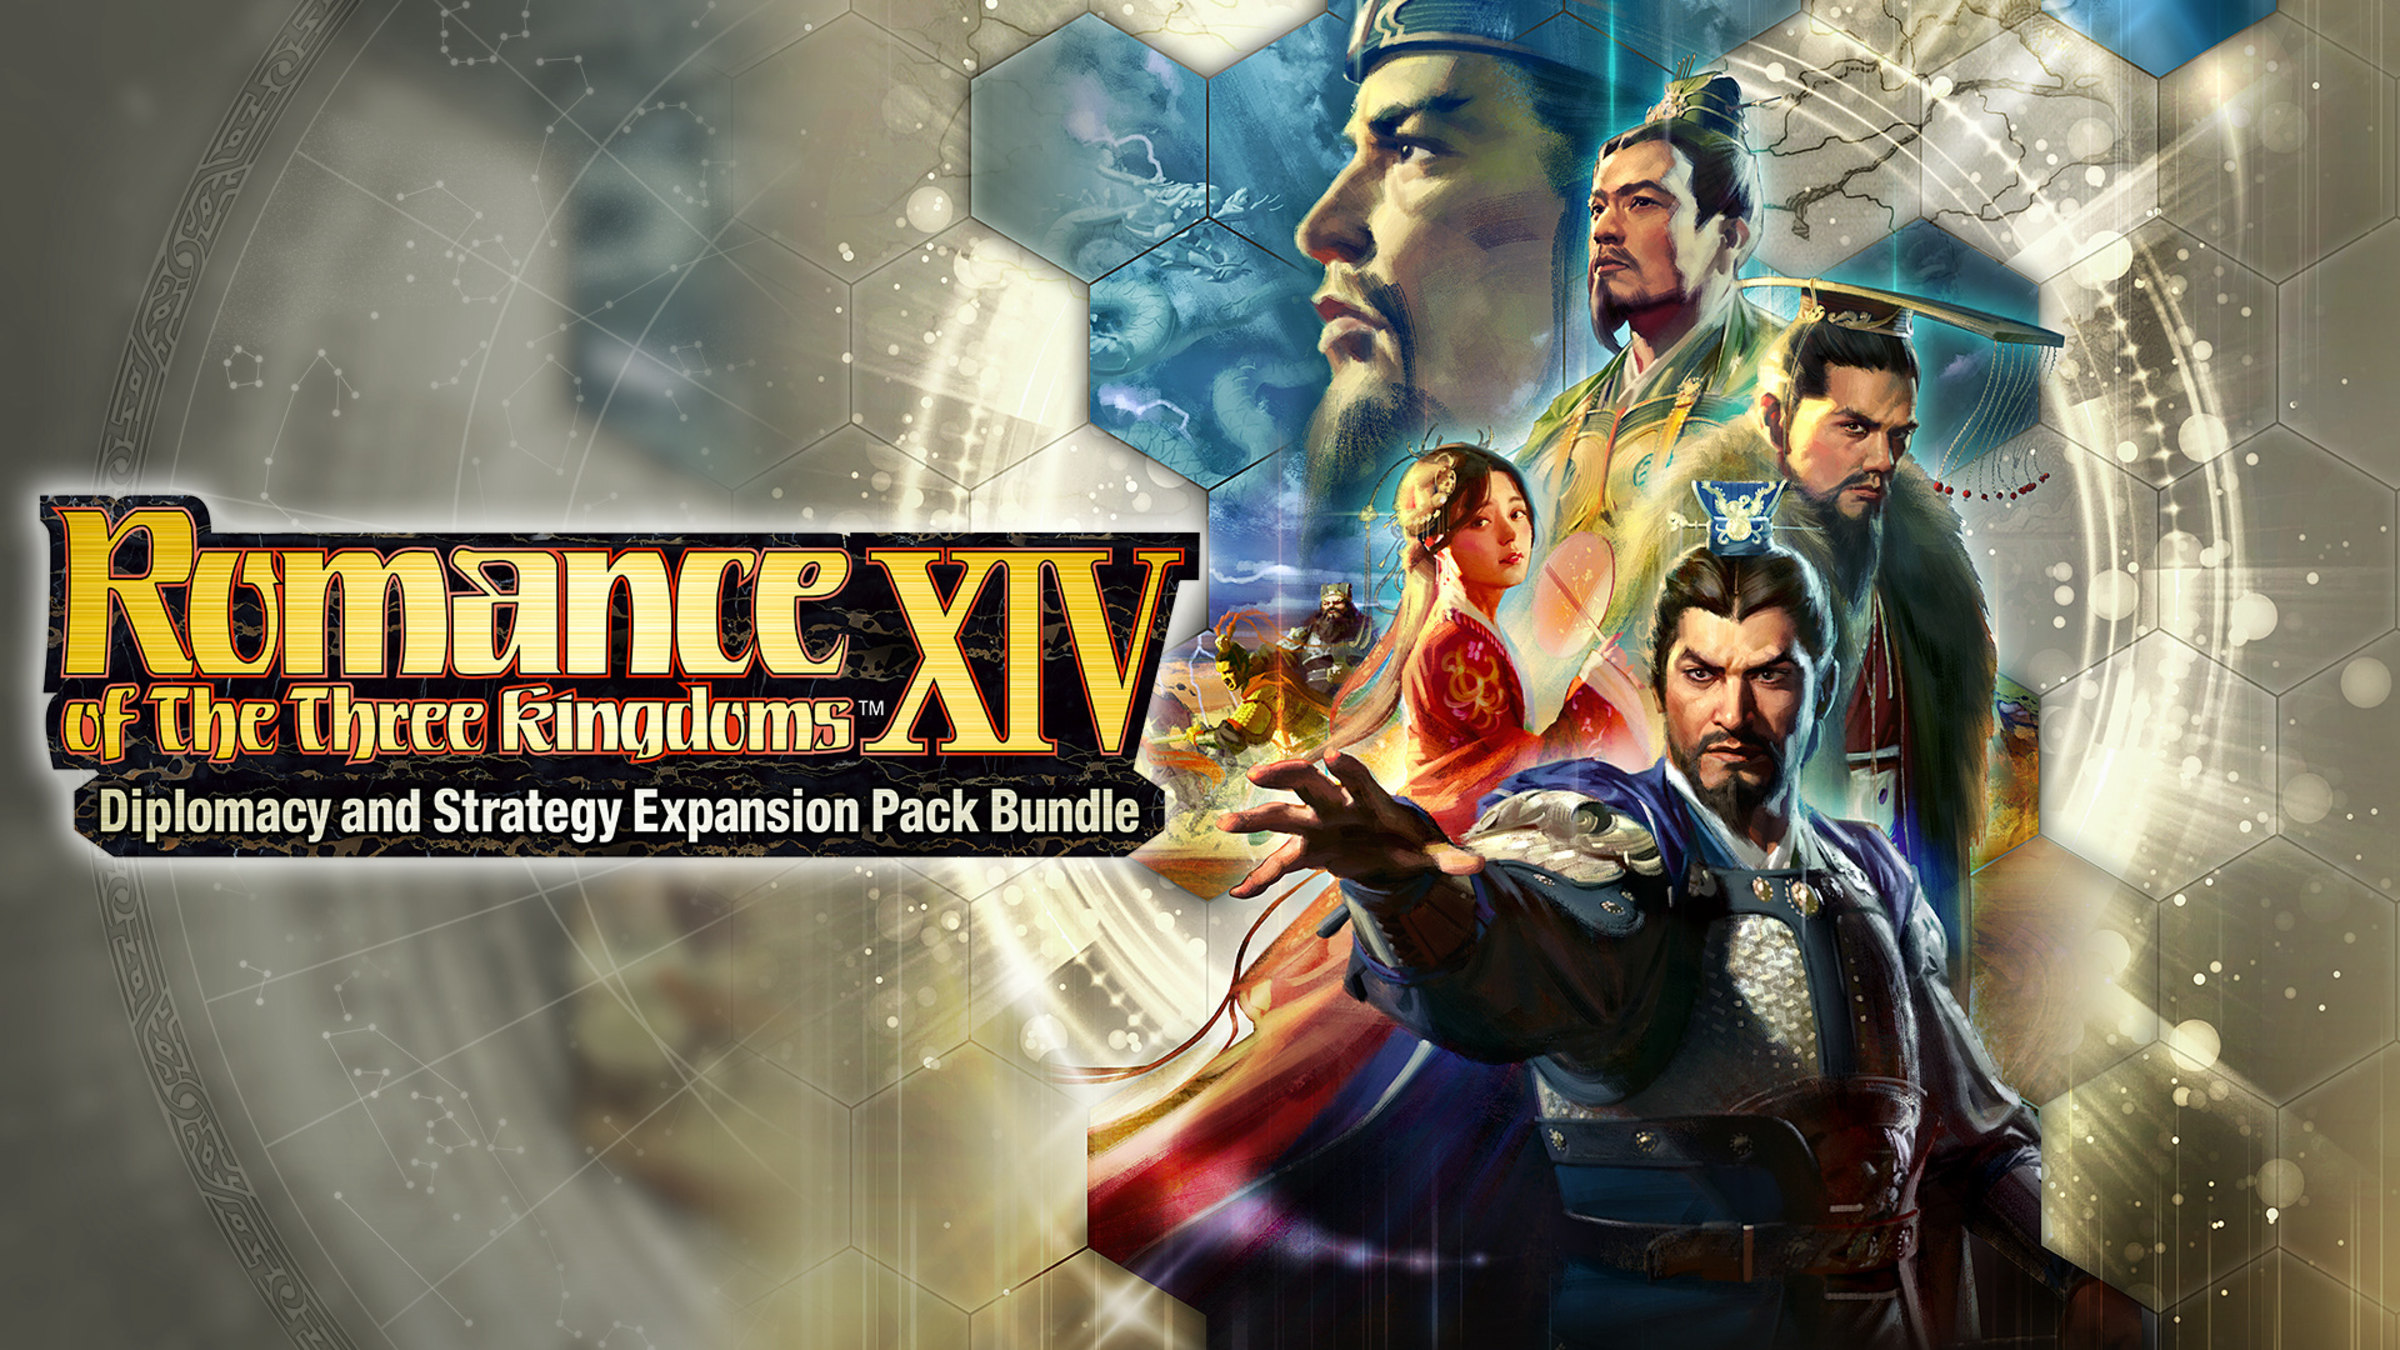 Romance Of The Three Kingdoms Xiv Diplomacy And Strategy Expansion Pack Bundle For Nintendo